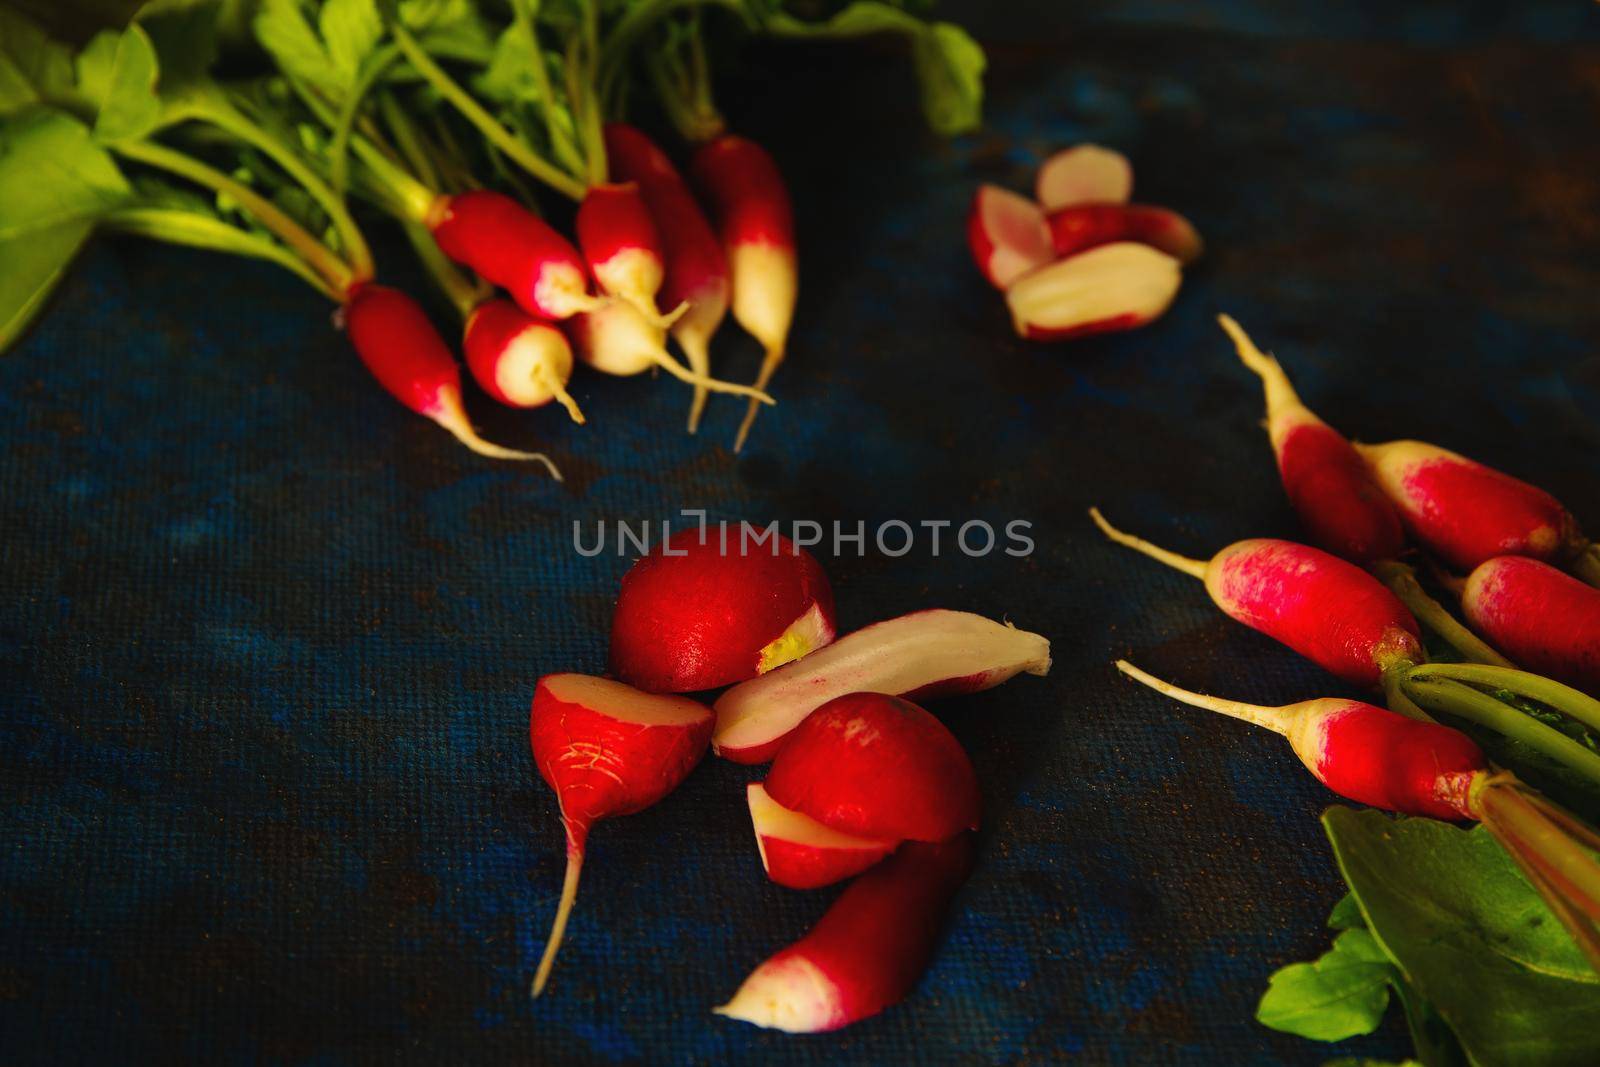 radish on a blue background laid out in groups by ozornina